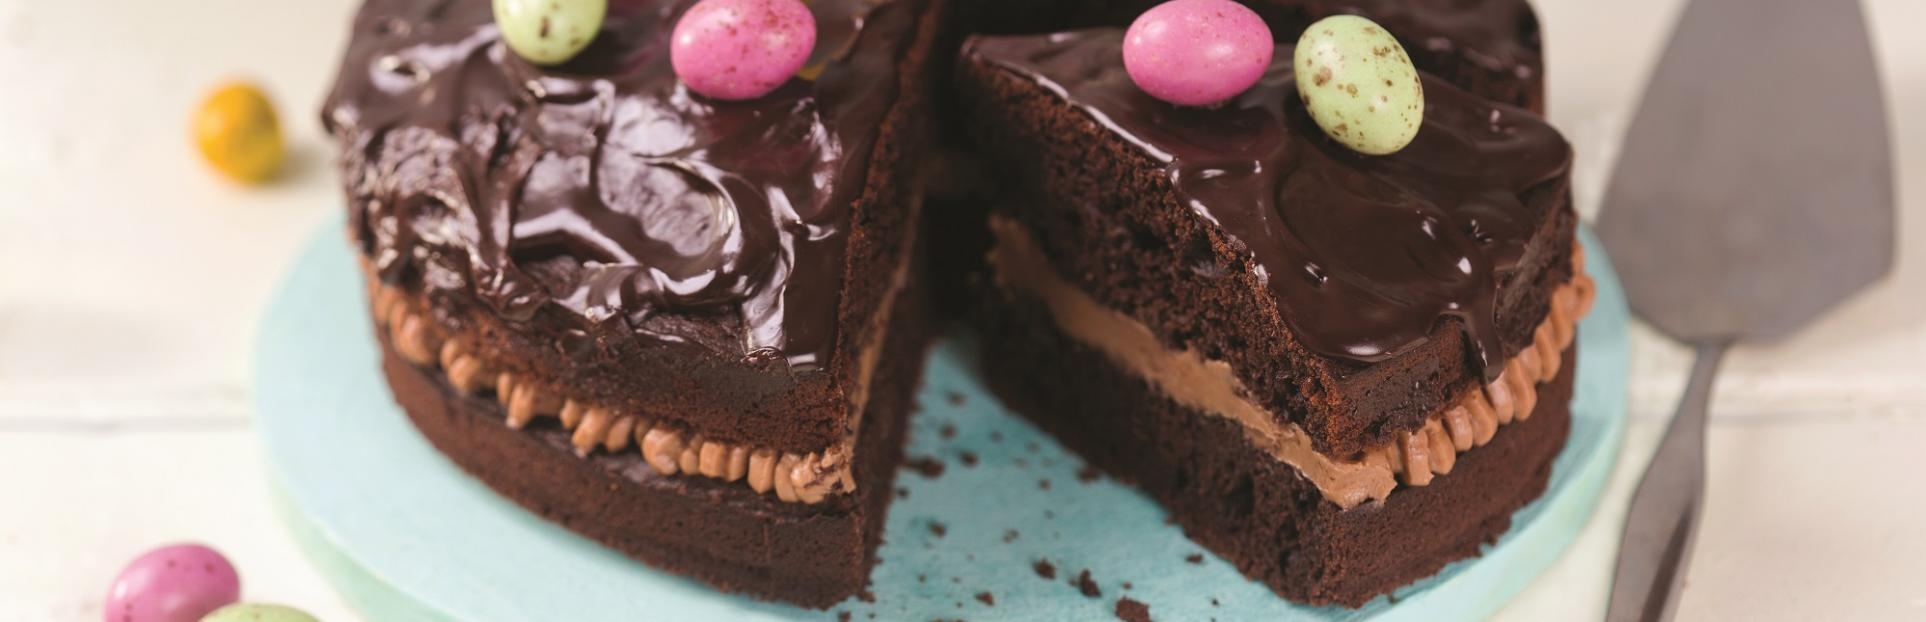 an image of chocolate cake with chocolate mini eggs on top